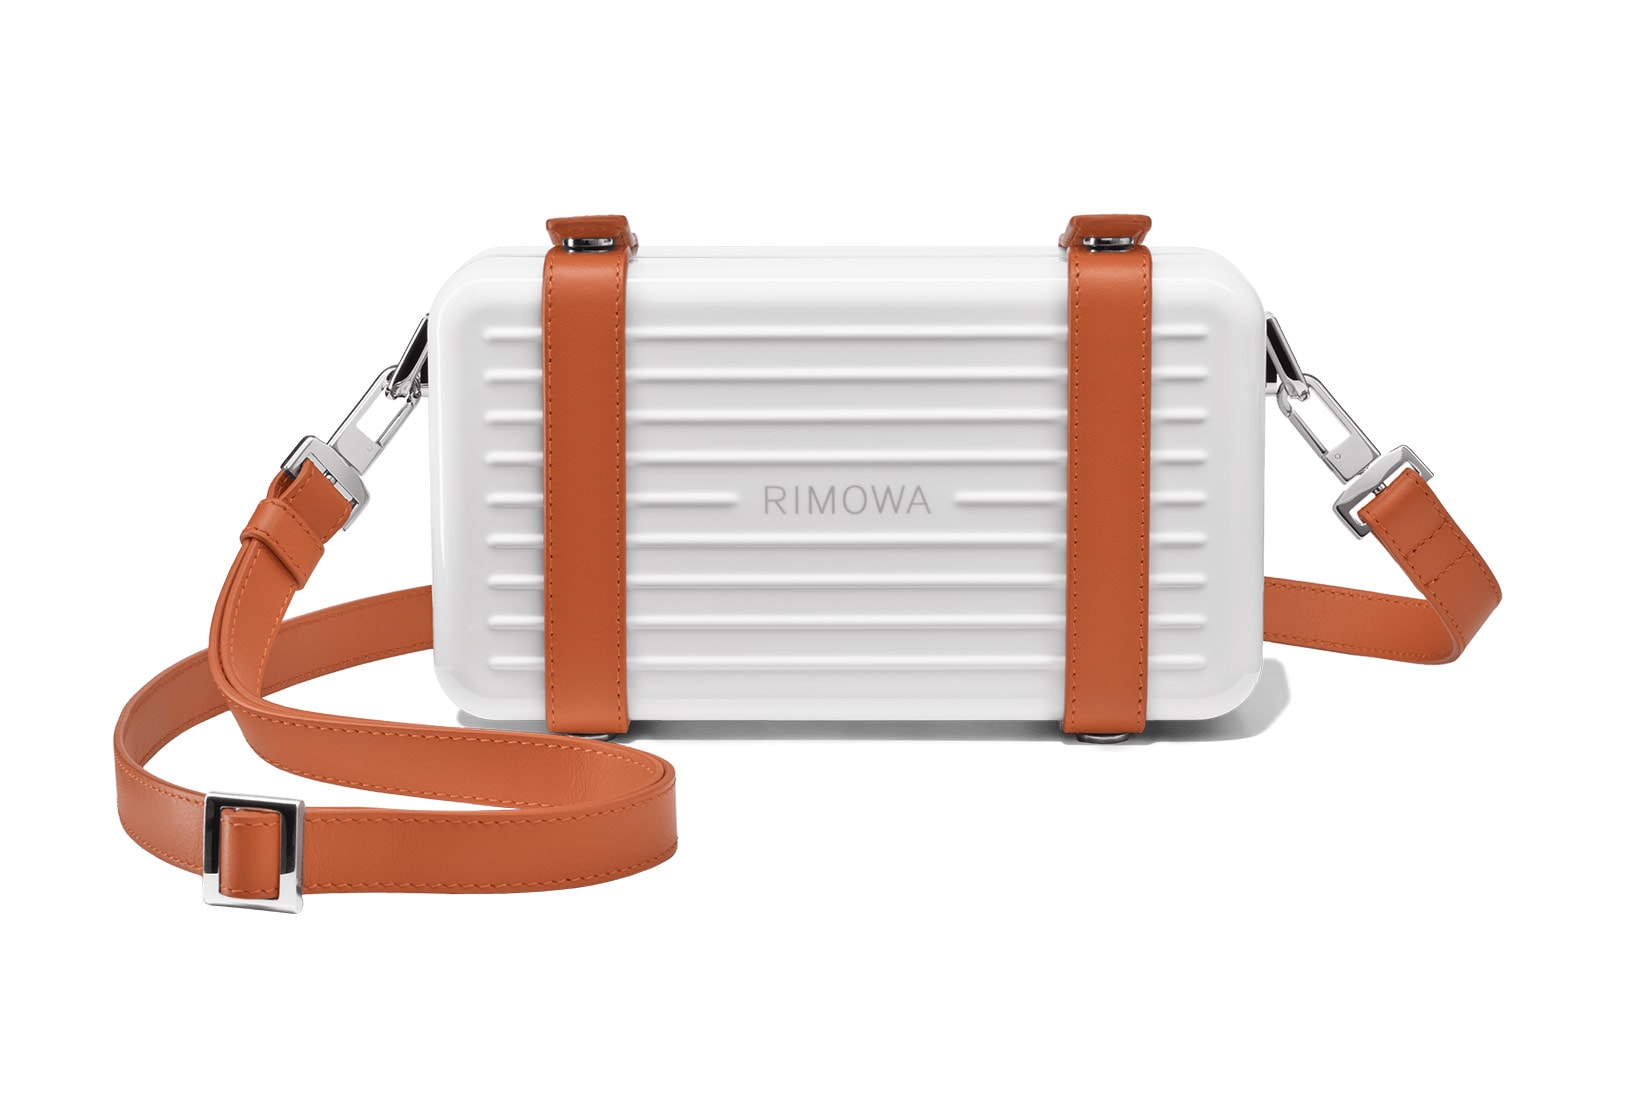 rimowa aluminium original collection new colorways personal white brown front view strap